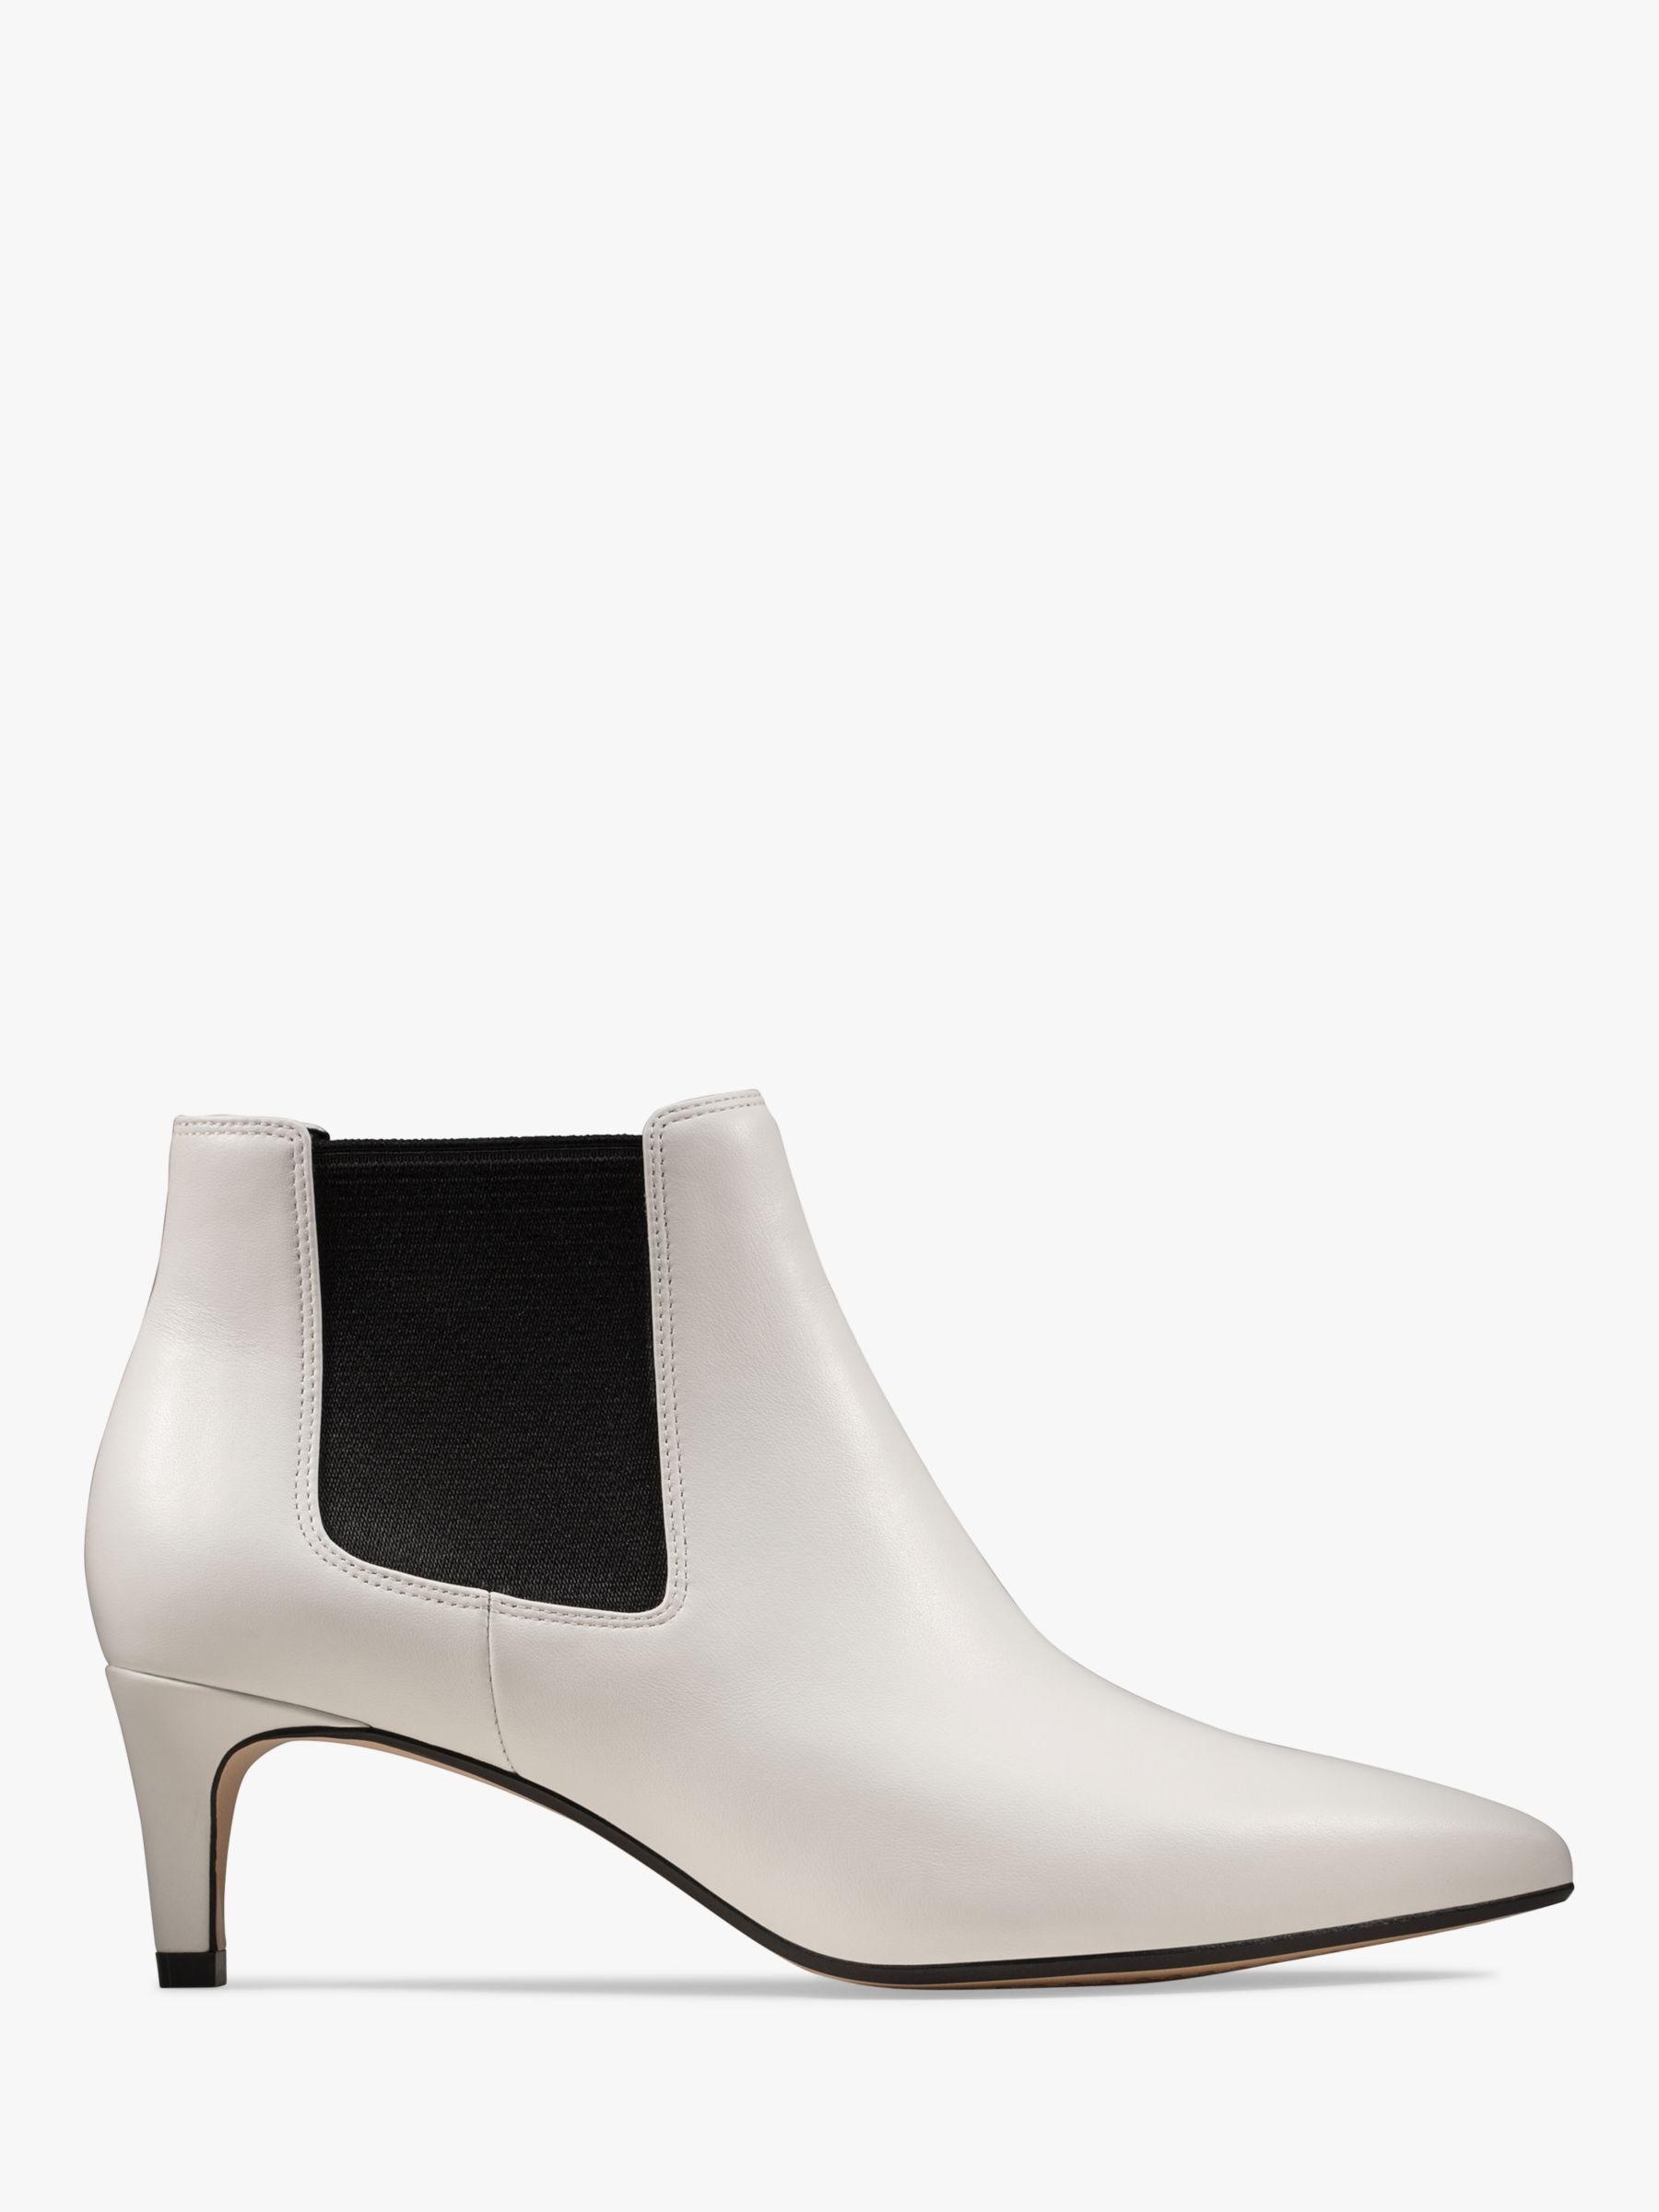 clarks white ankle boots